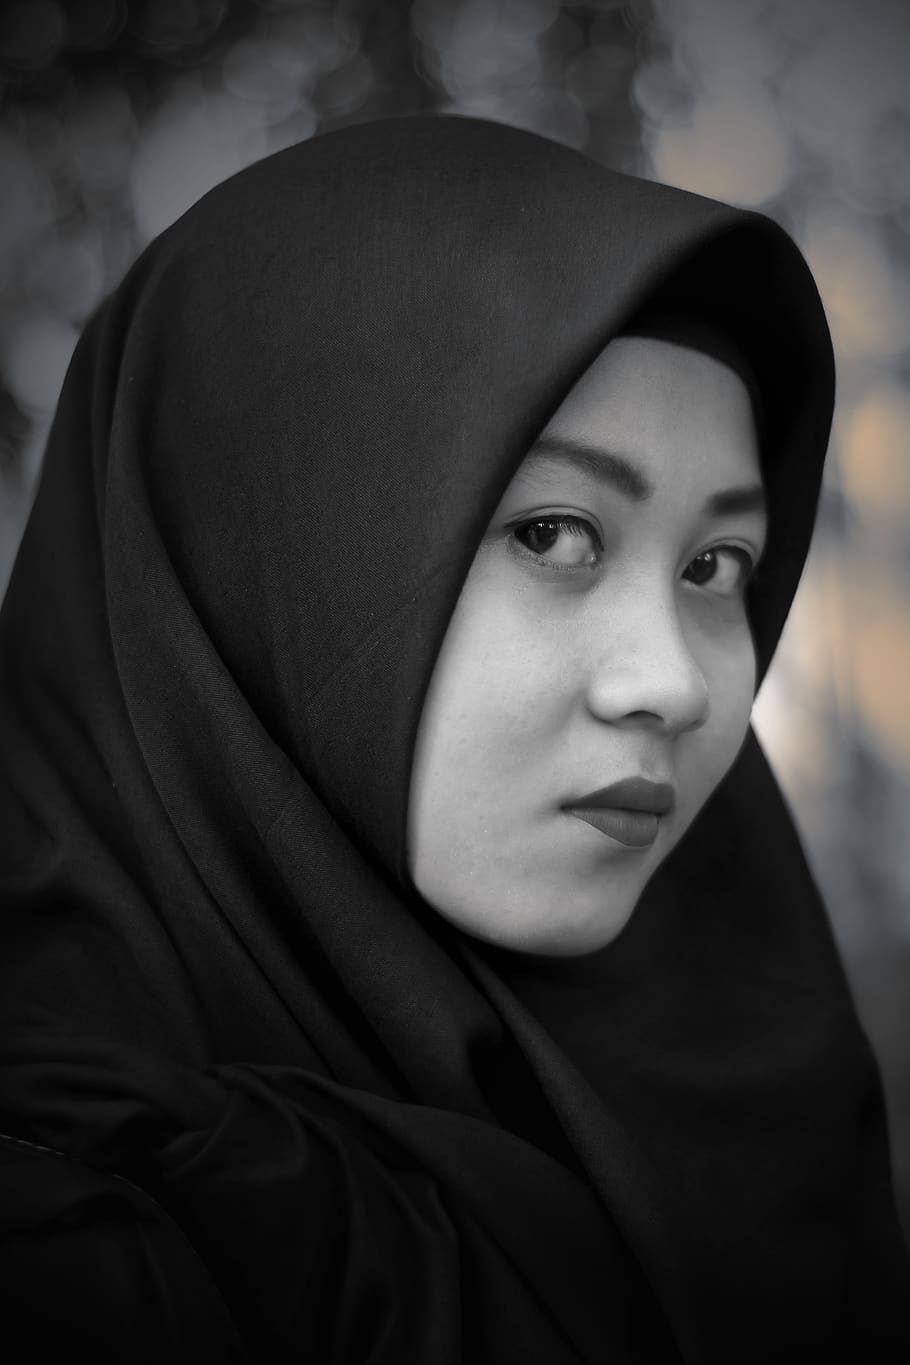 hijab, face, women, indonesian, portrait, looking at camera, one person, headshot, young adult, real people